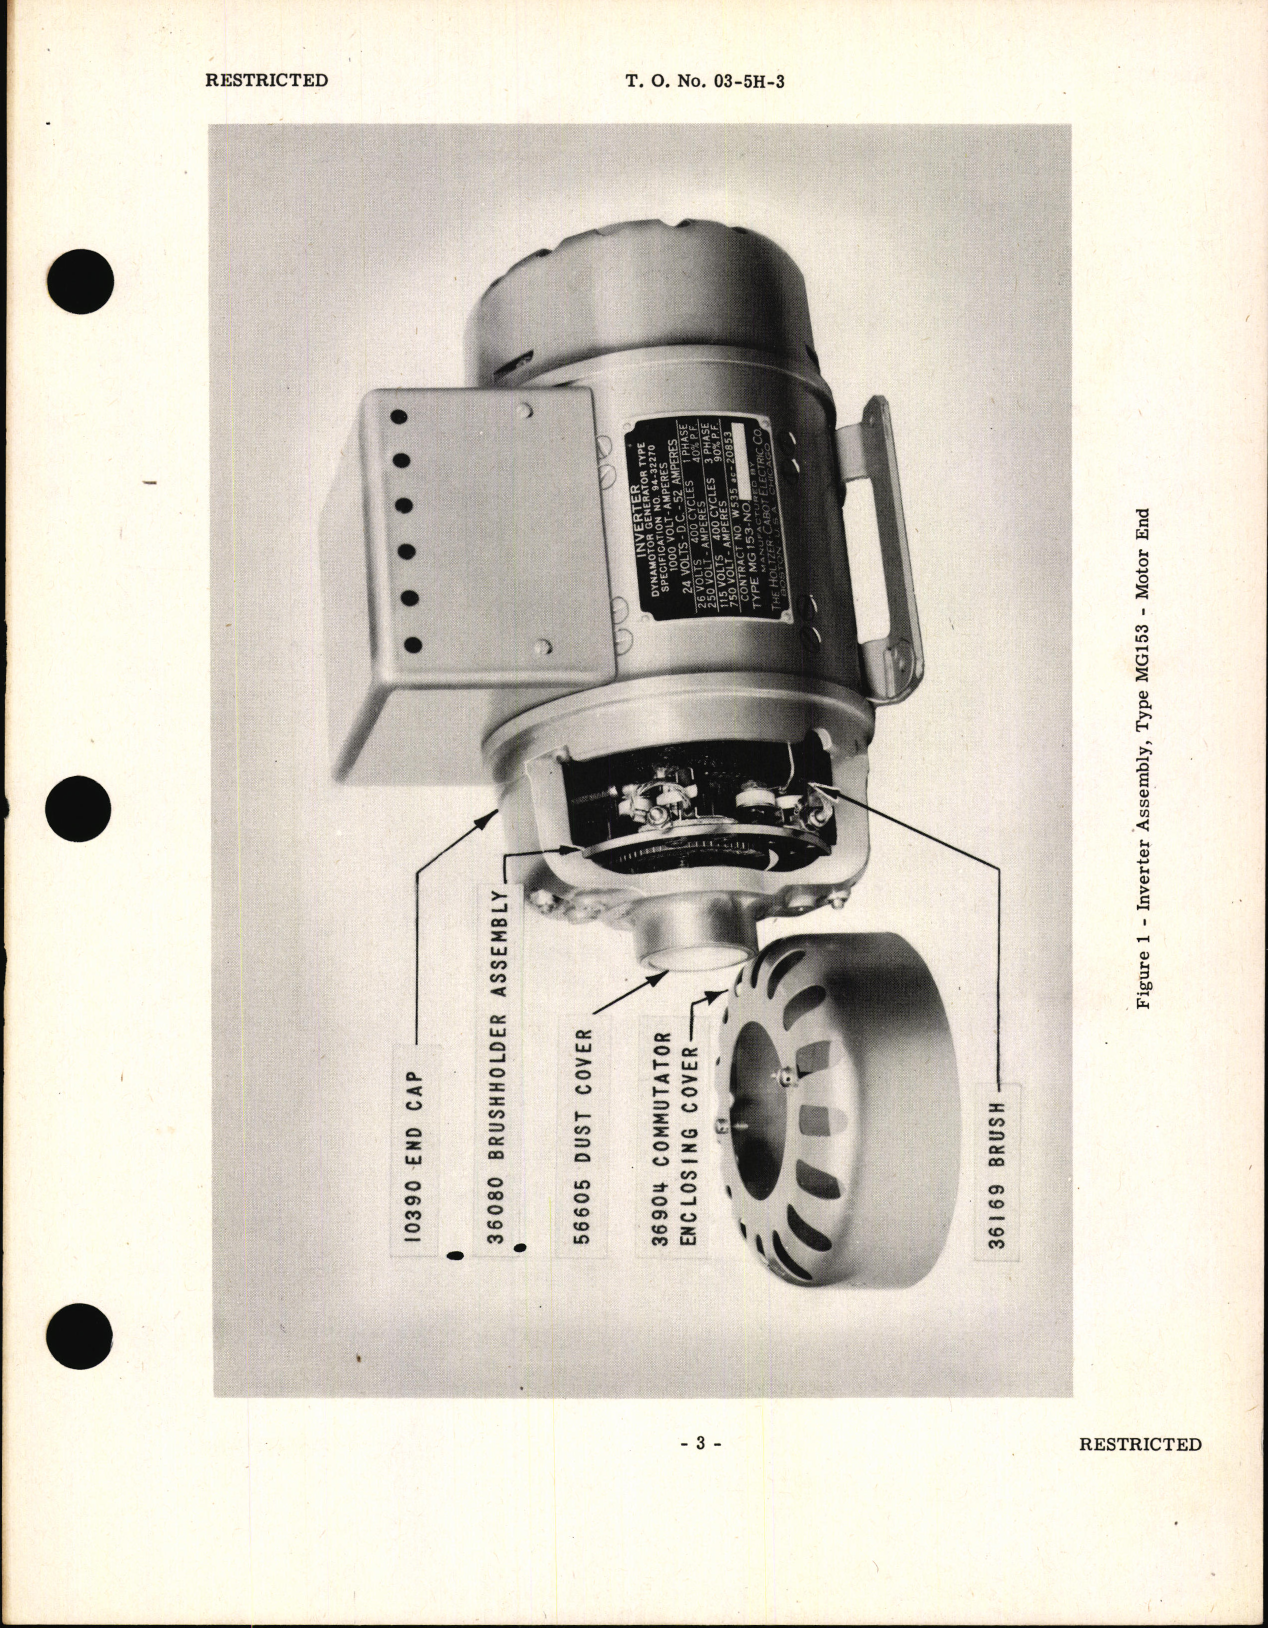 Sample page 5 from AirCorps Library document: Handbook of Instructions with Parts Catalog for Inverter Type MG-153